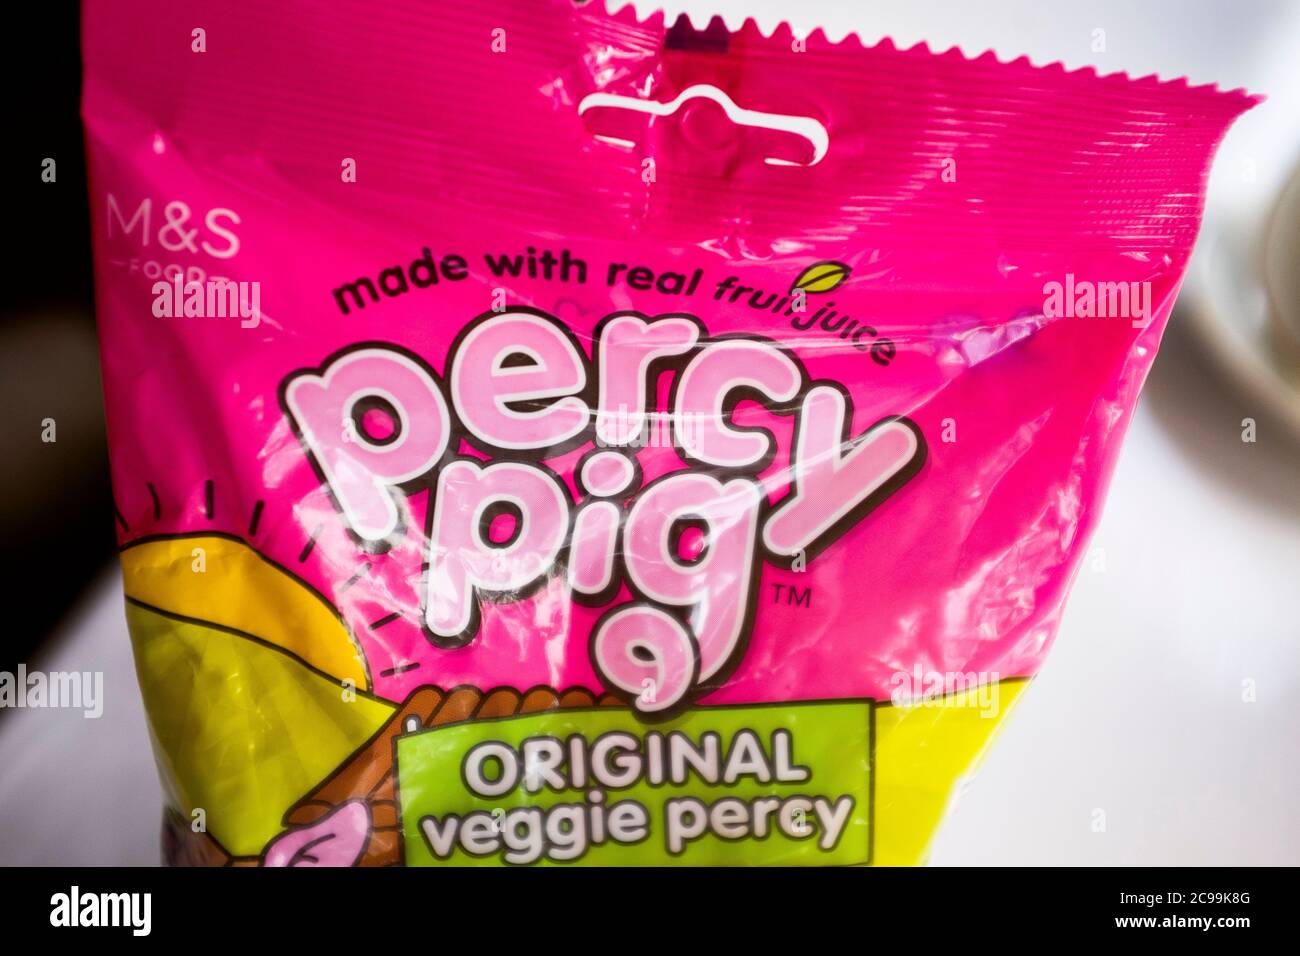 M&S Original Veggie Percy Pig sweets made with real fruit juice Stock Photo